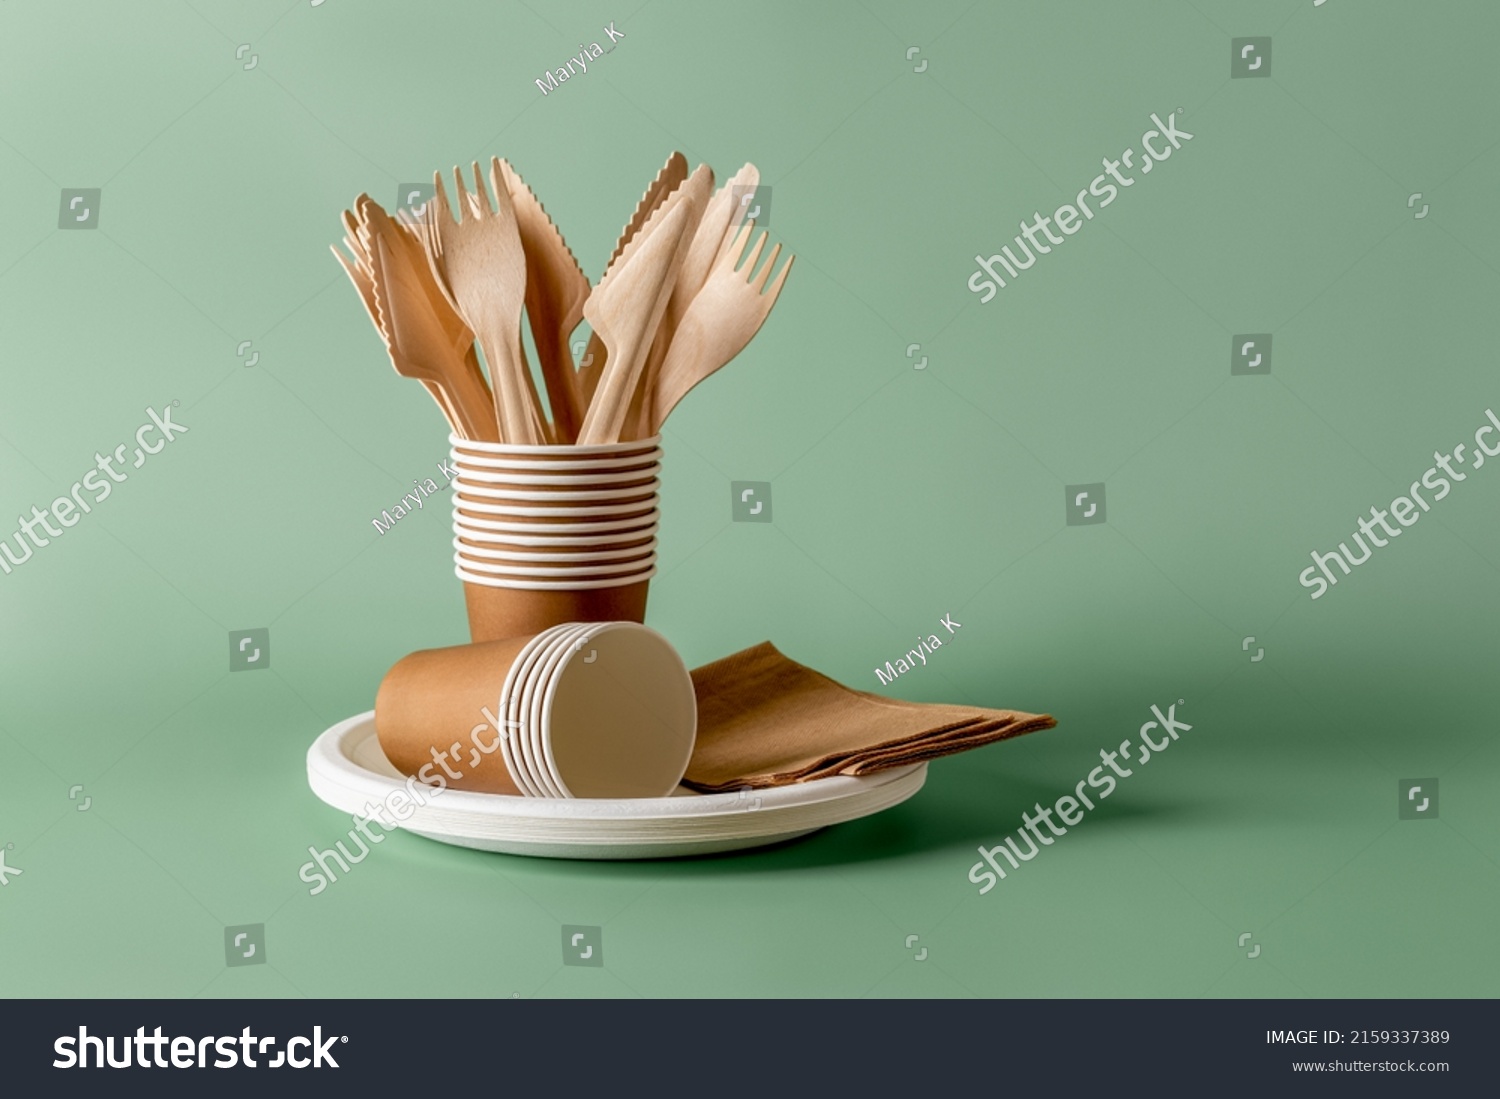 Stack of eco-friendly disposable tableware. Wooden forks and knives, paper cups and plates against green background. Biodegradable cutlery and dishes for picnics, takeaways. Copy space. Front view. #2159337389